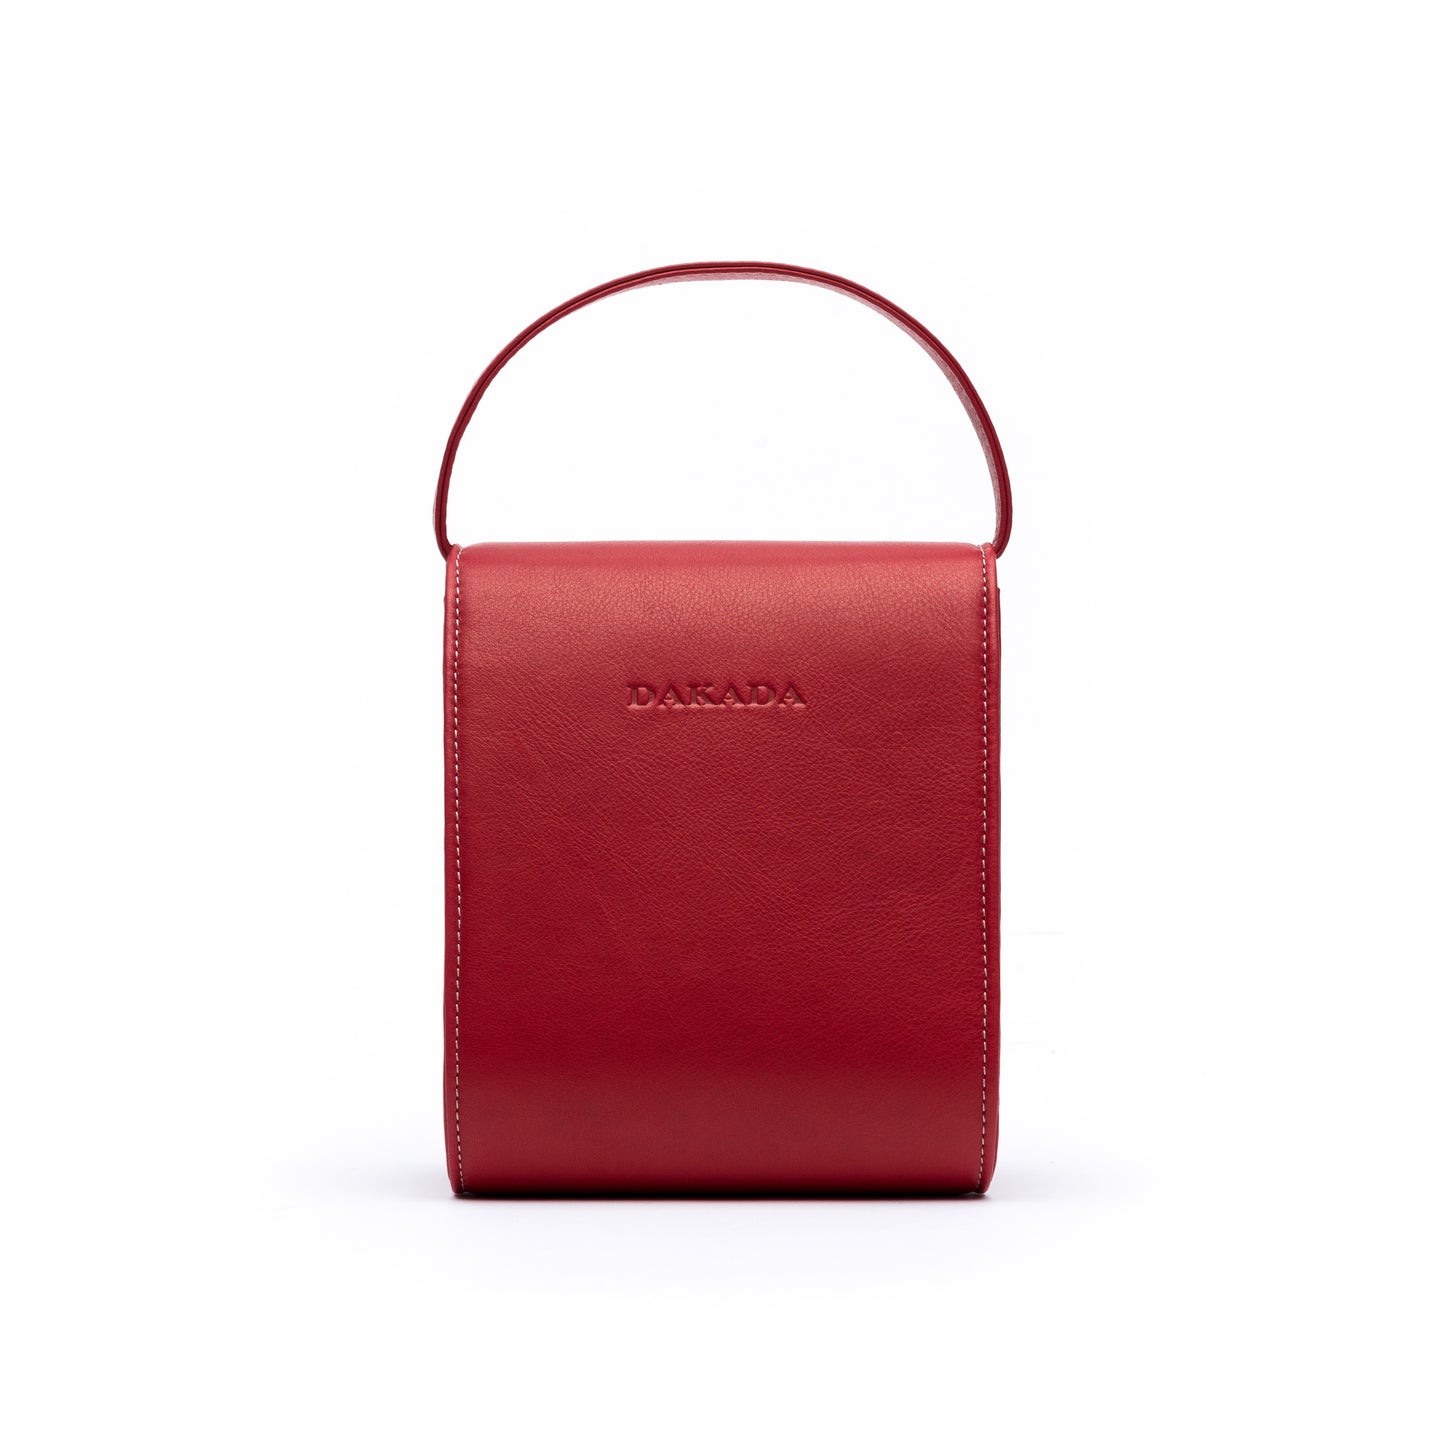 Cucci- Red Leather Bag